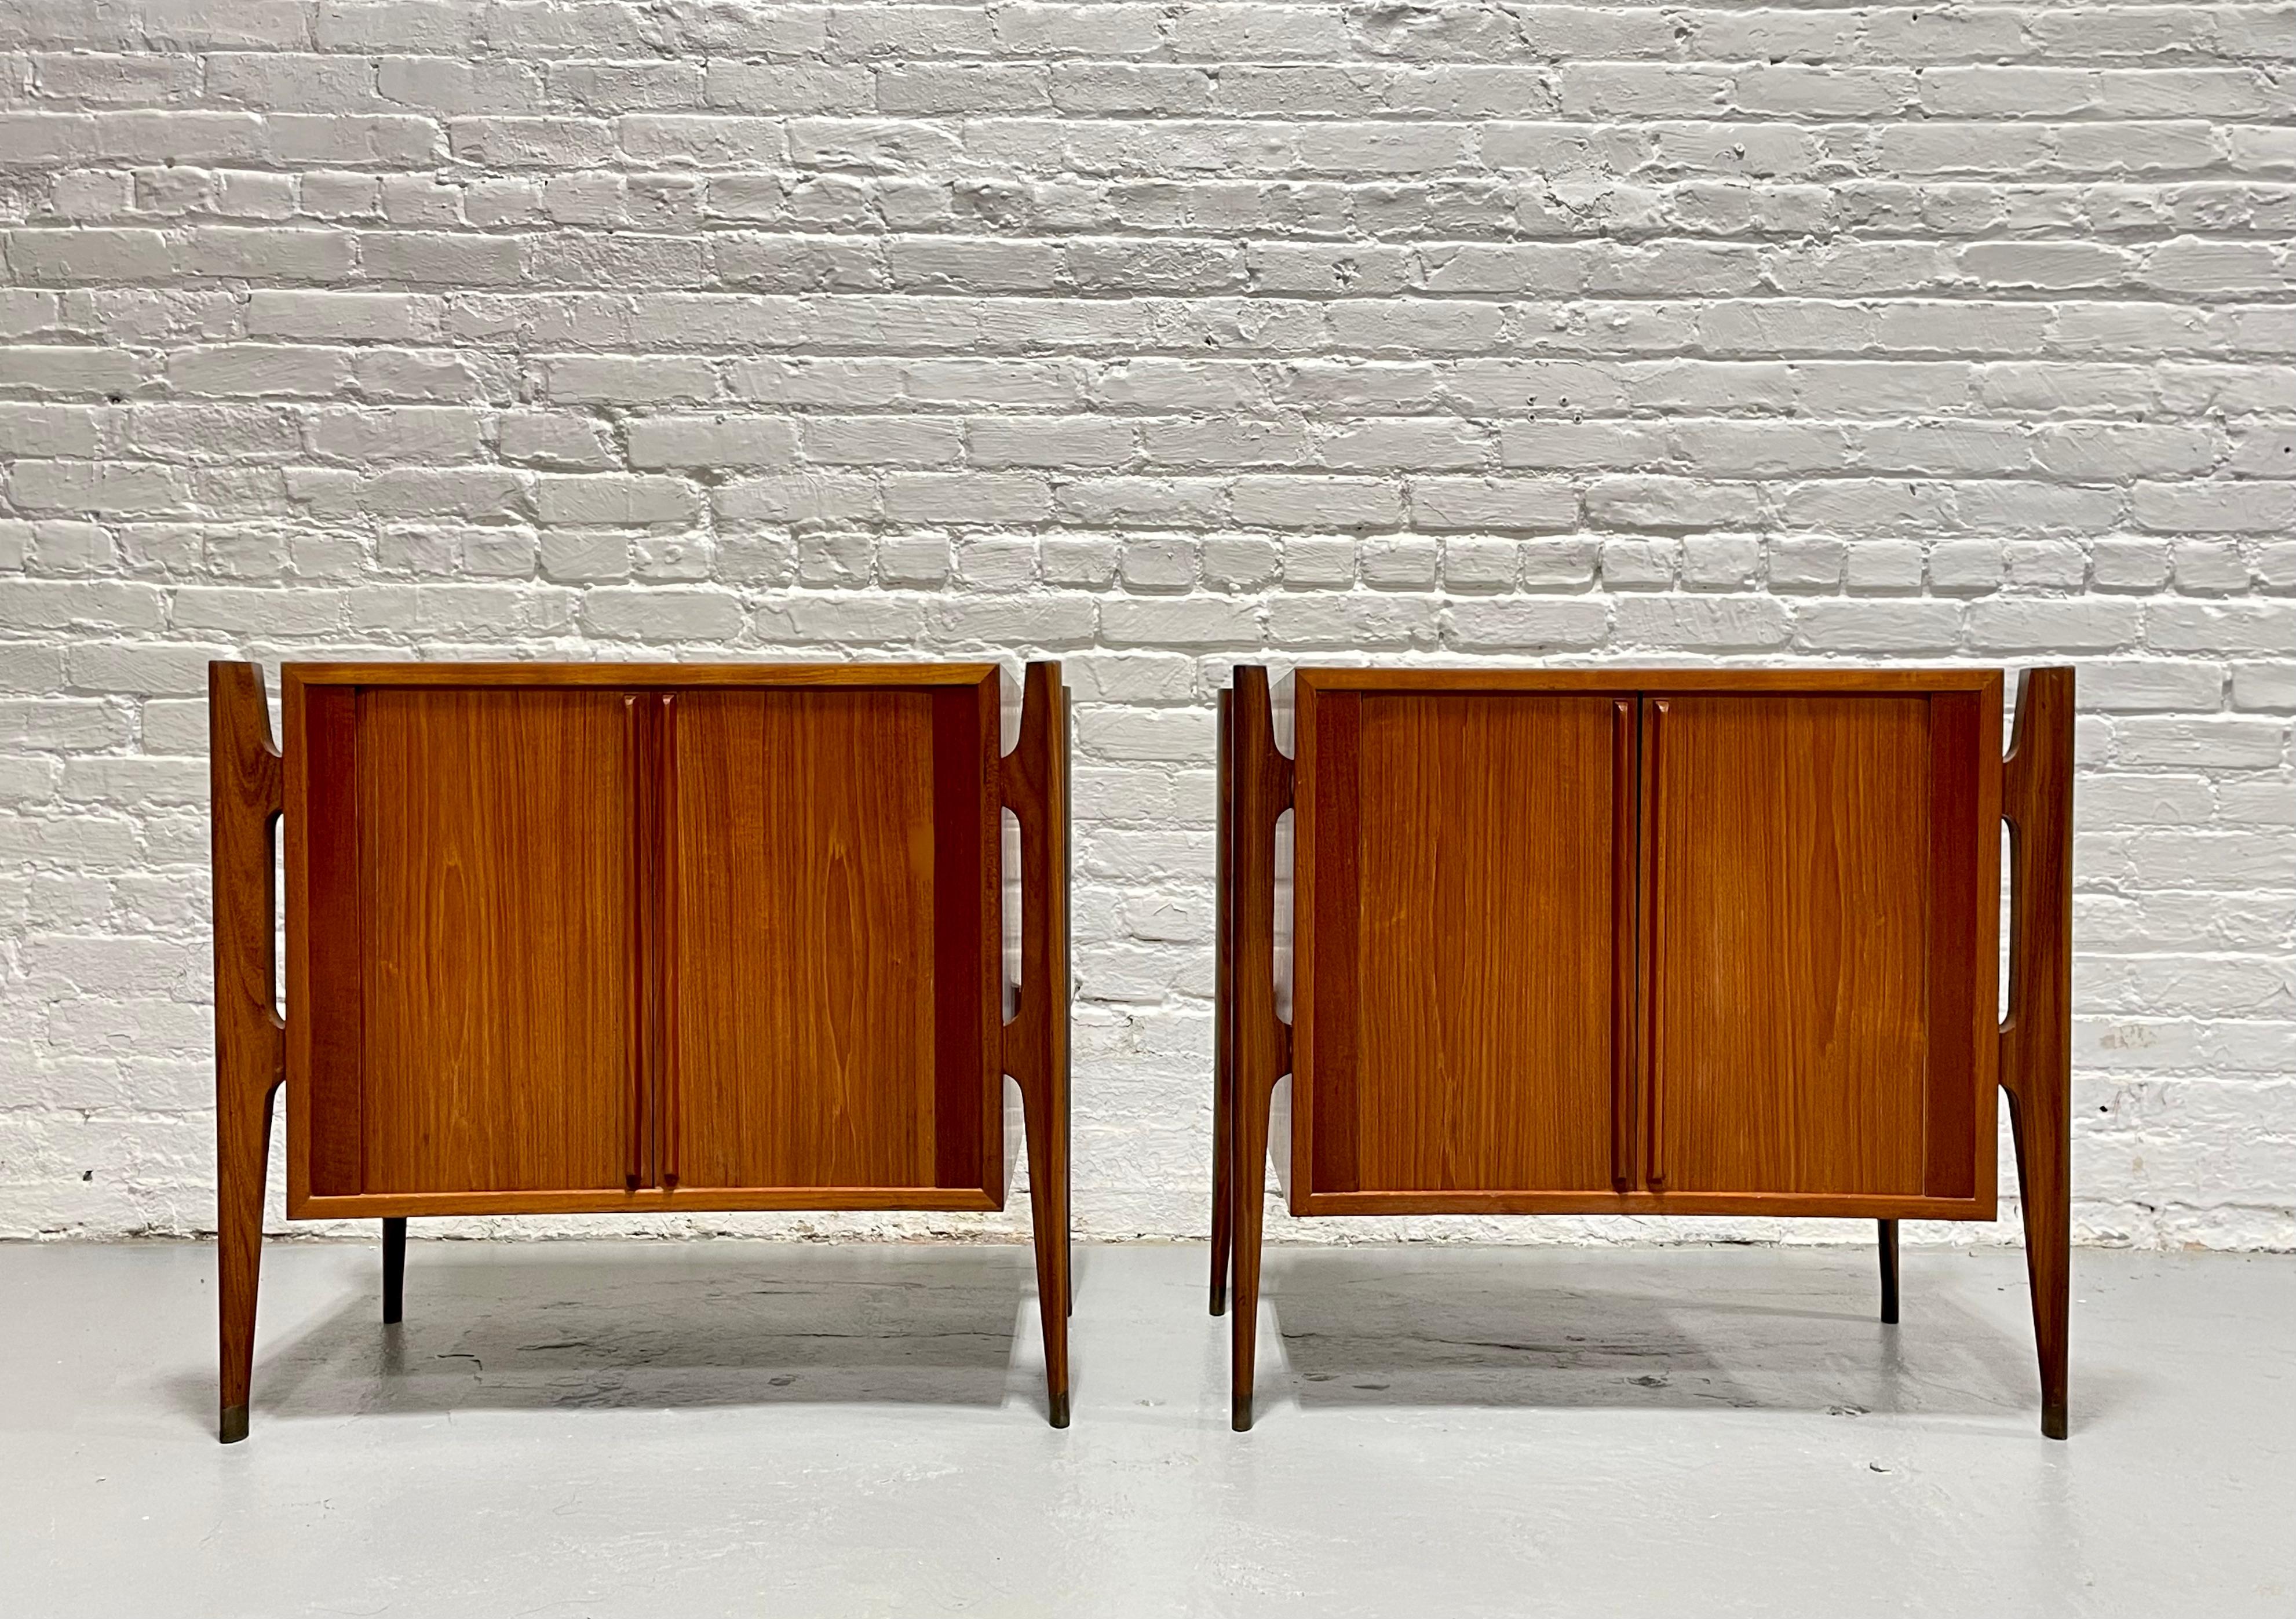 Rare Pair of Teak Exoskeleton Tambour Door Nightstands designed by Jorgen Clausen Brande Møbelfabrik, Denmark c. 1950. Hands down the nicest pair of nightstands we’ve had in our shop. From the sculpted leg framing to the smooth tambour doors, these